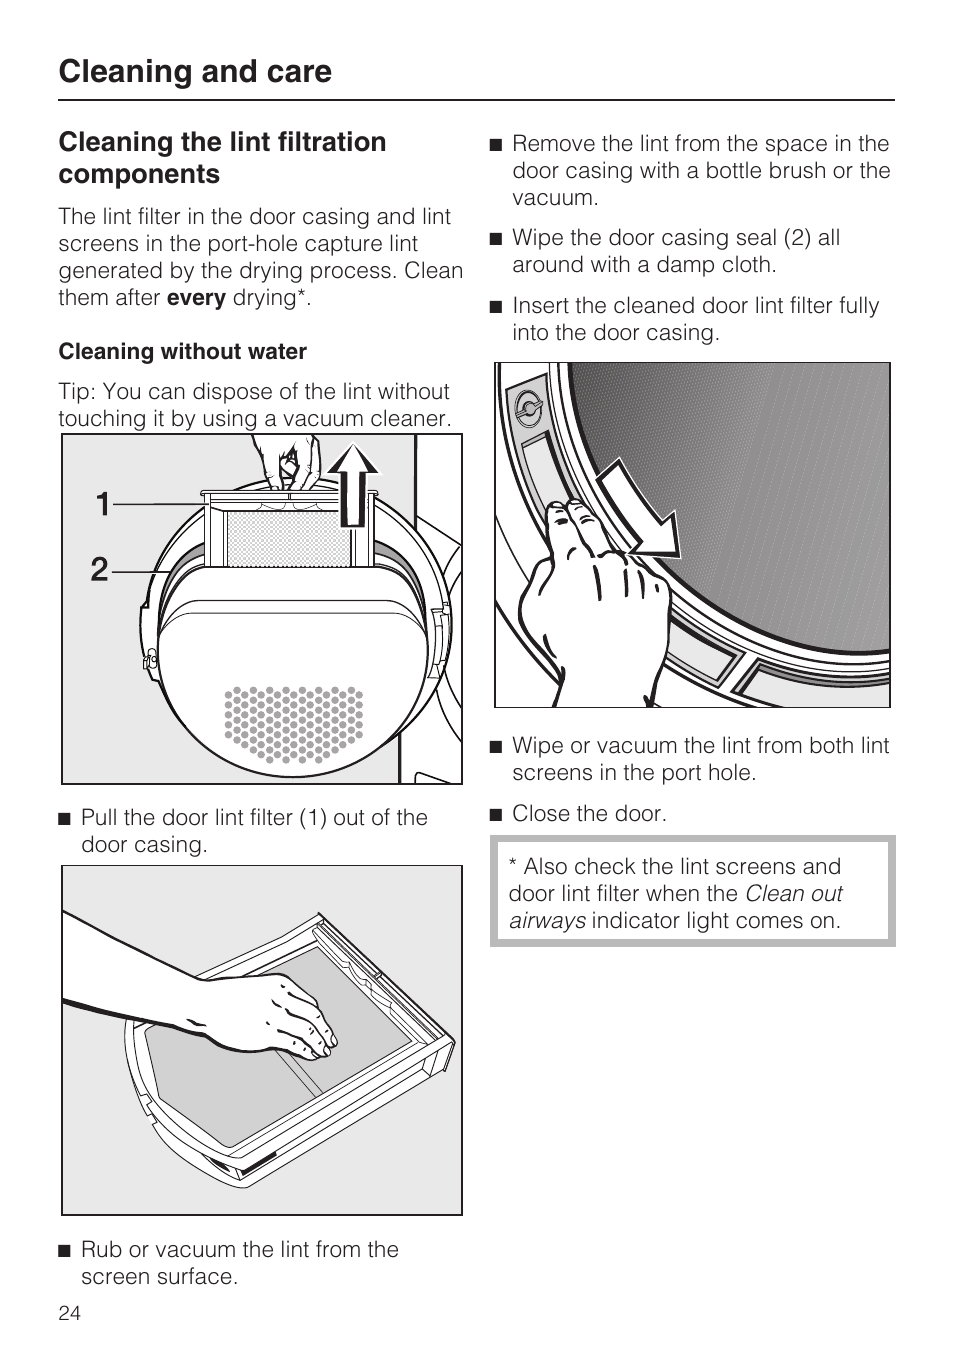 Cleaning the lint filtration components 24, Cleaning without water 24,  Cleaning and care | Miele NOVOTRONIC T 7644 C User Manual | Page 24 / 56 |  Original mode